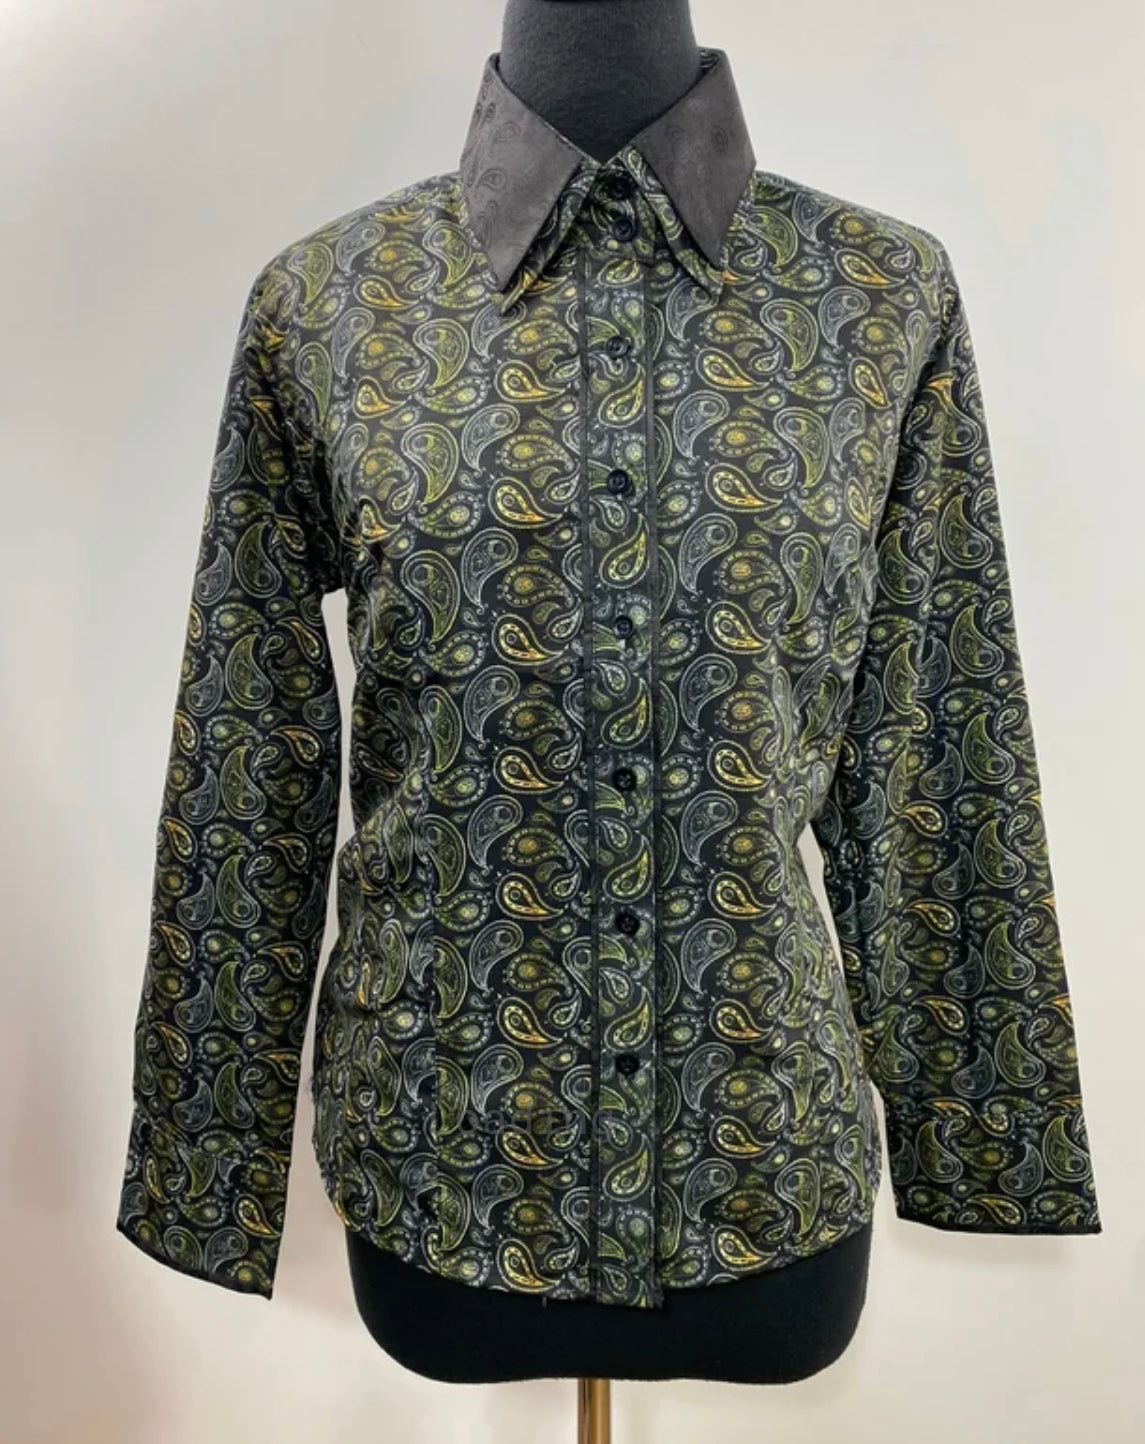 Western Button Up Paisley